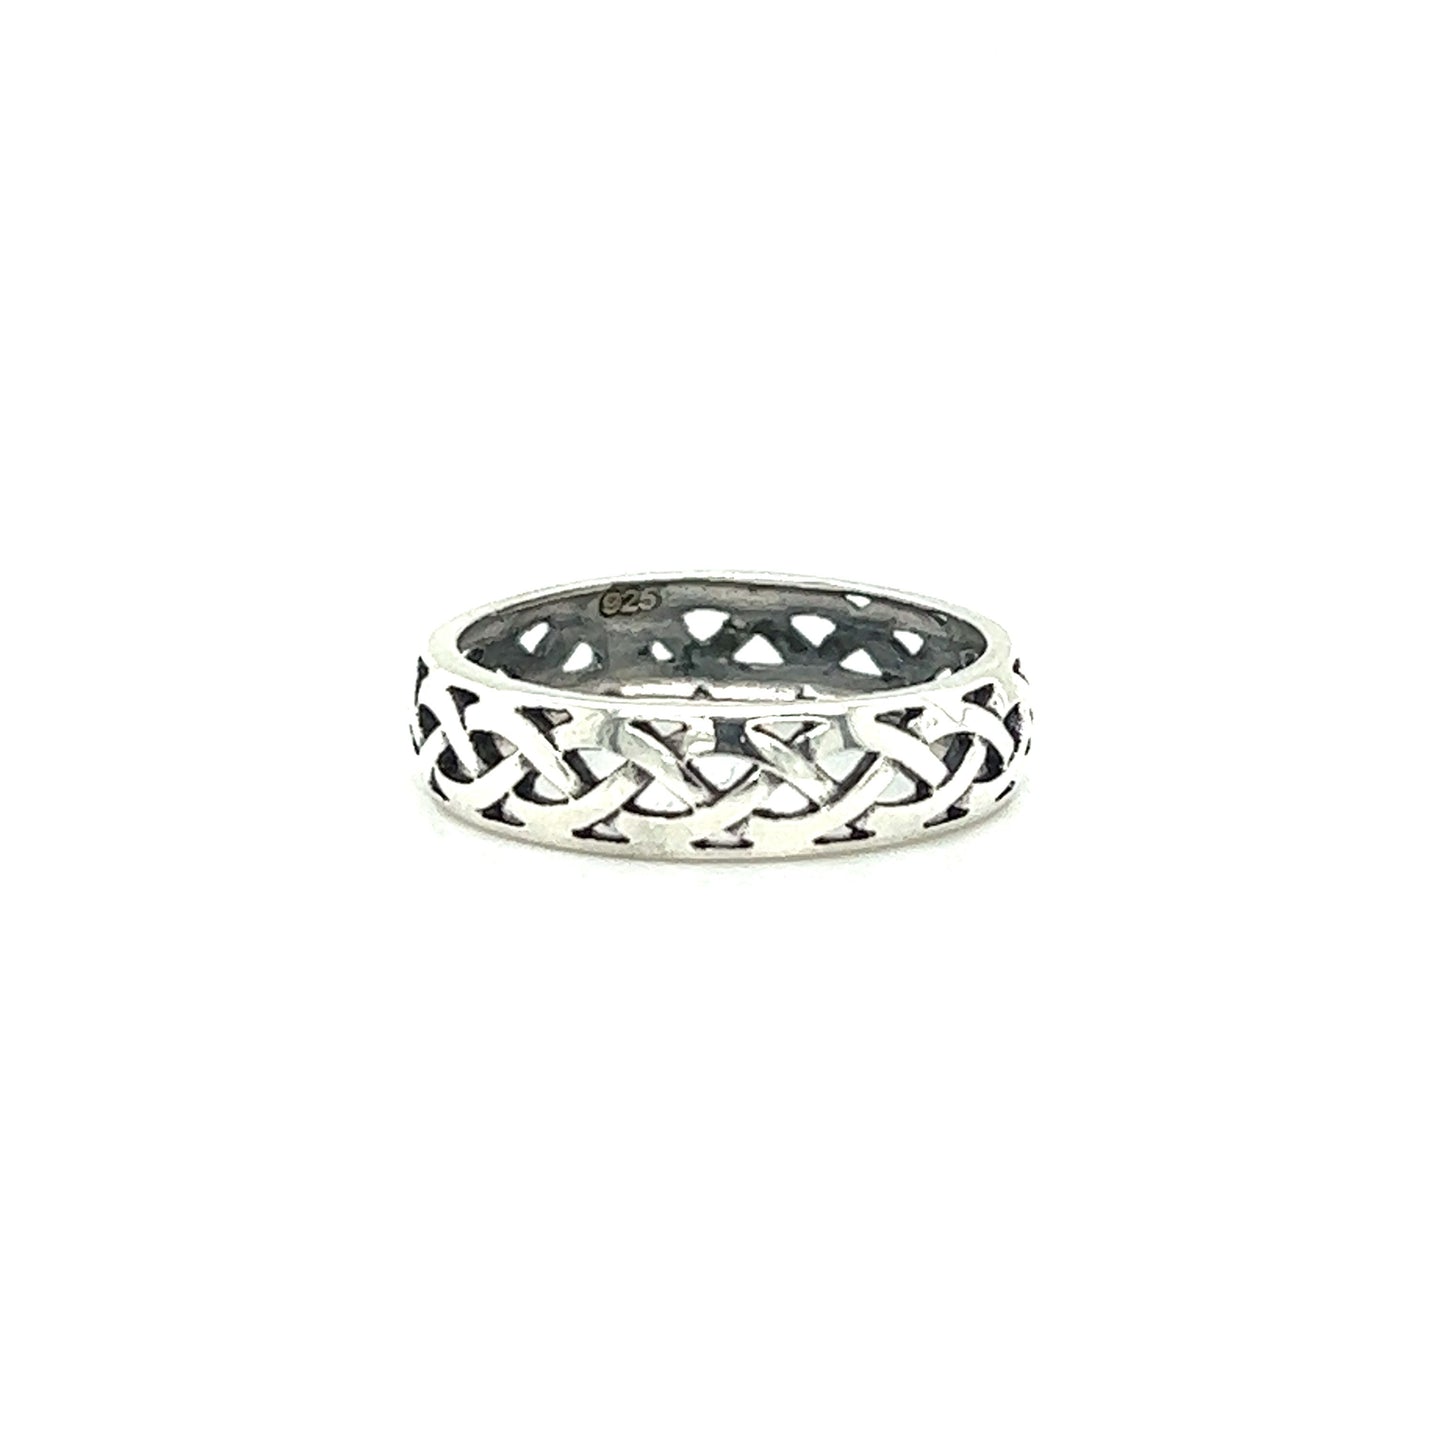 A cultural Silver Band With Celtic Weave.